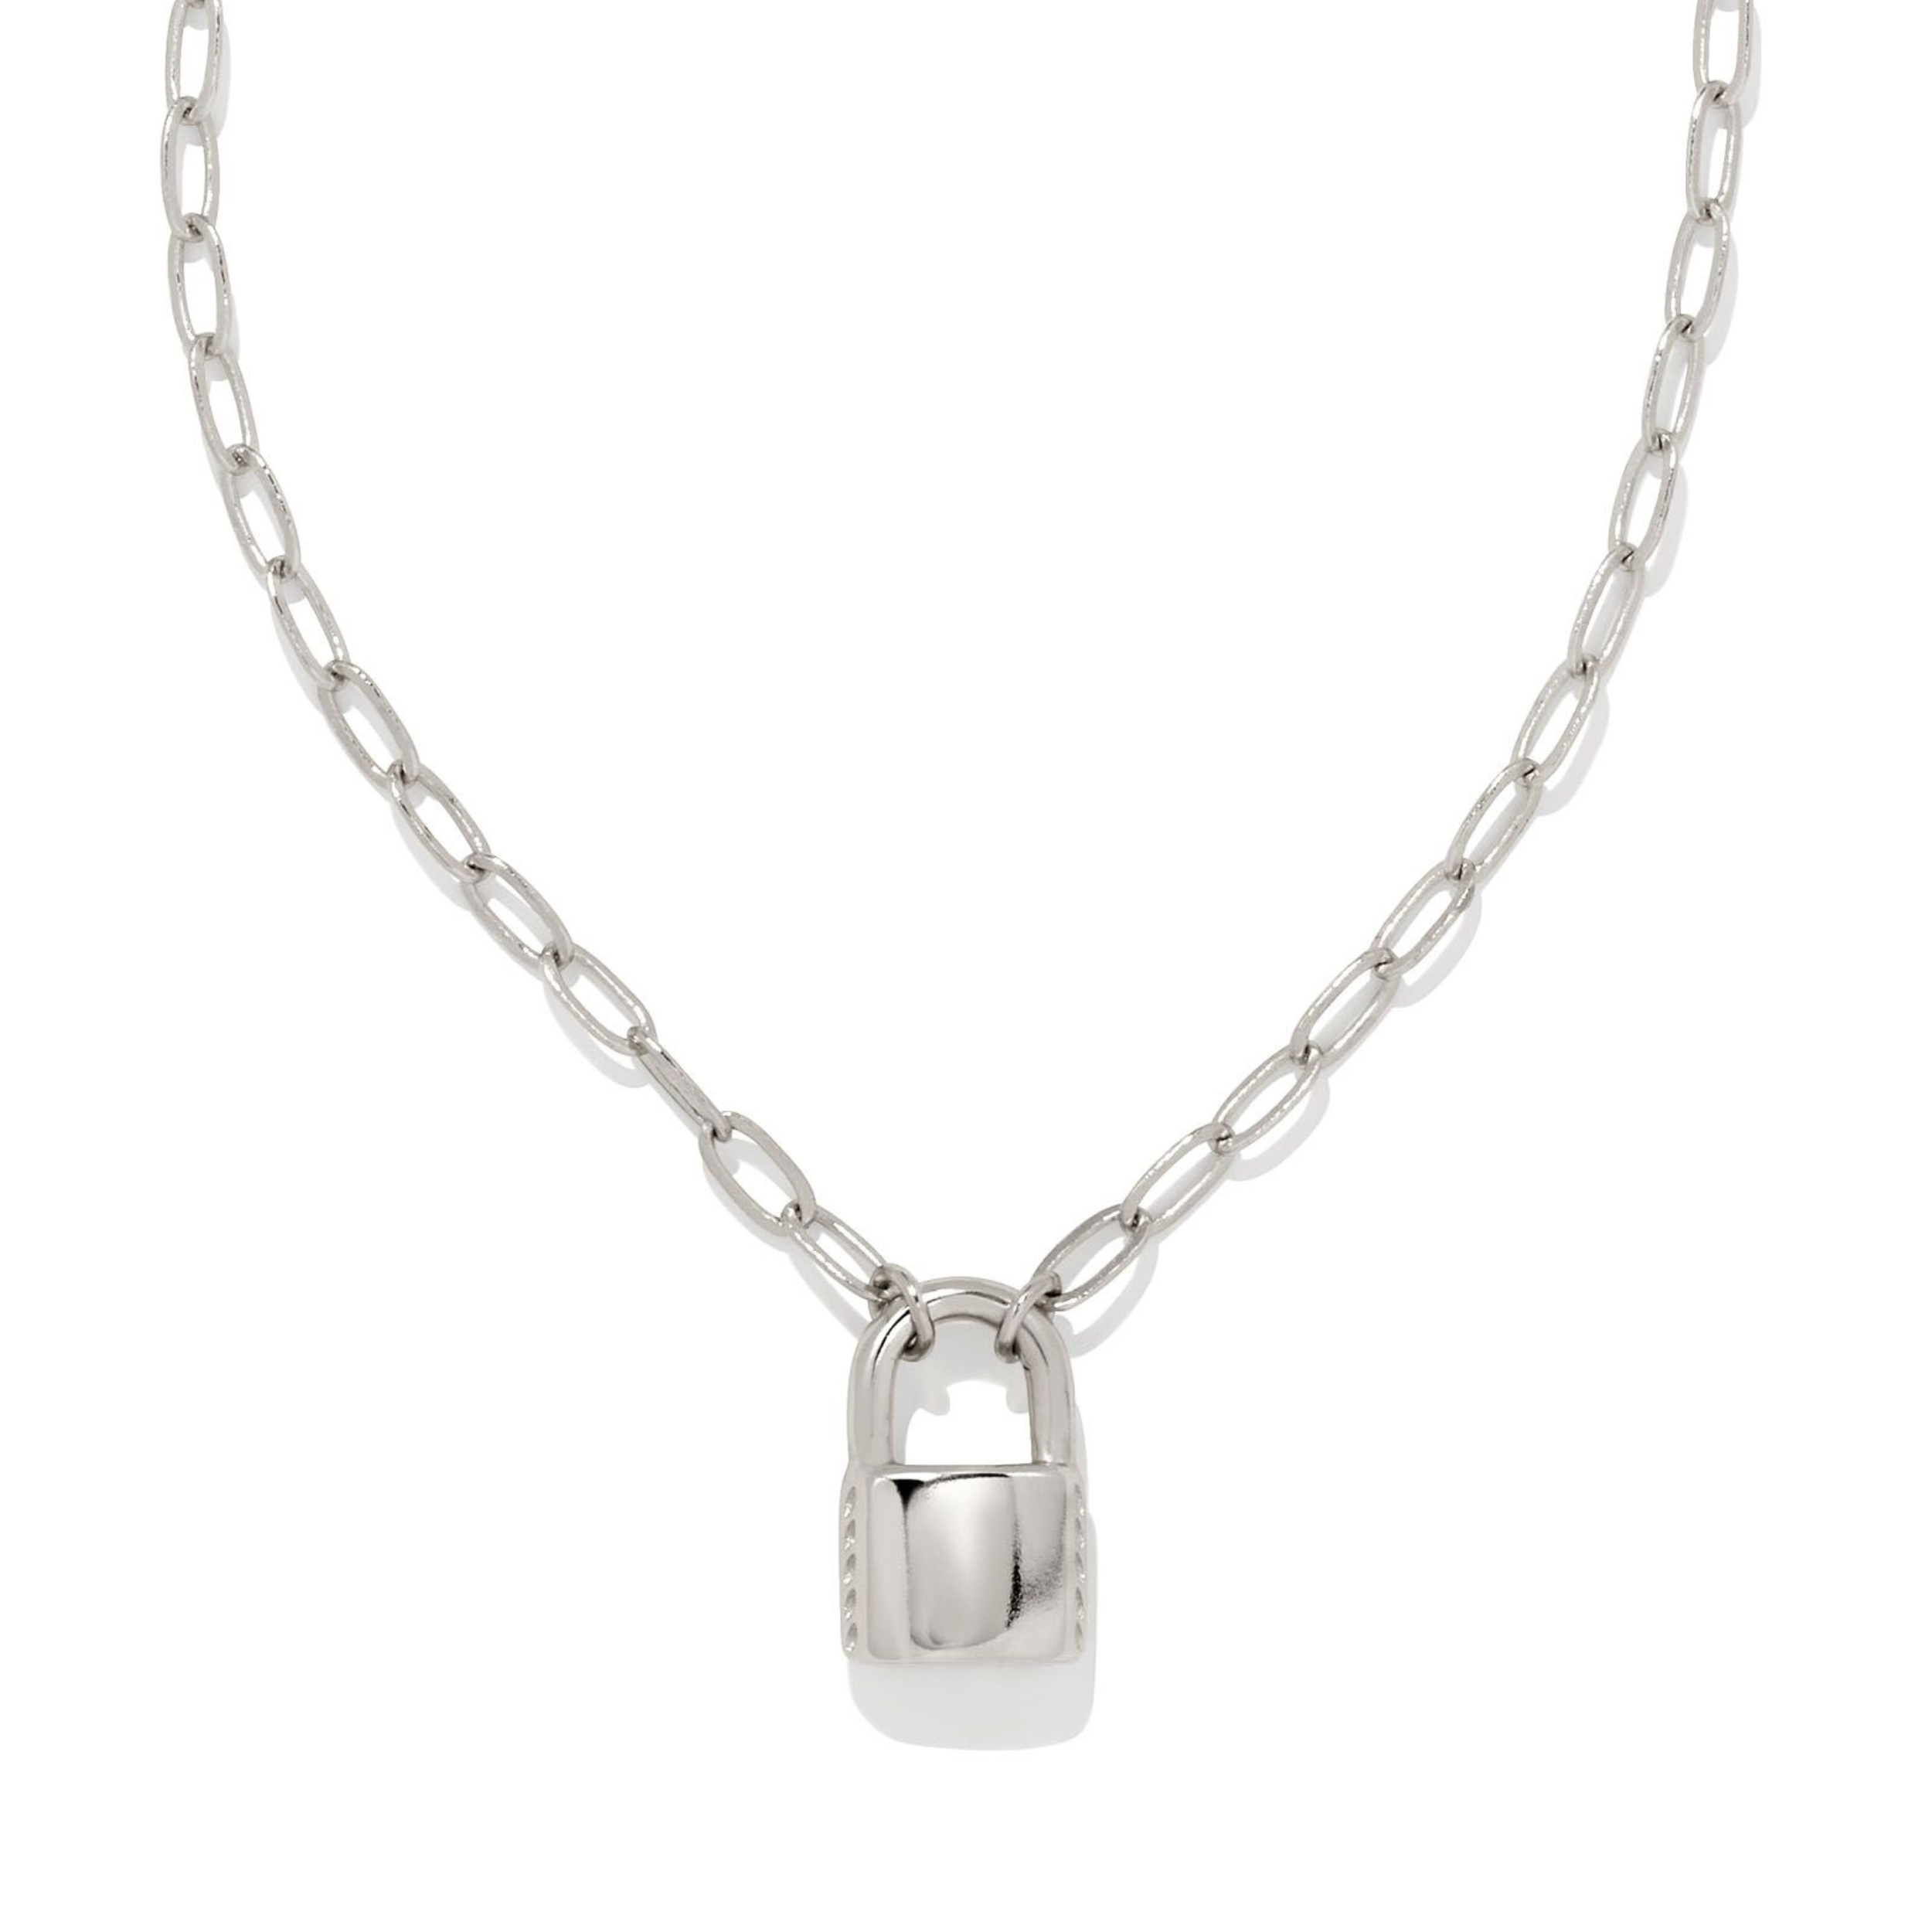 Kendra Scott | Jess Small Lock Chain Necklace in Silver - Giddy Up Glamour Boutique